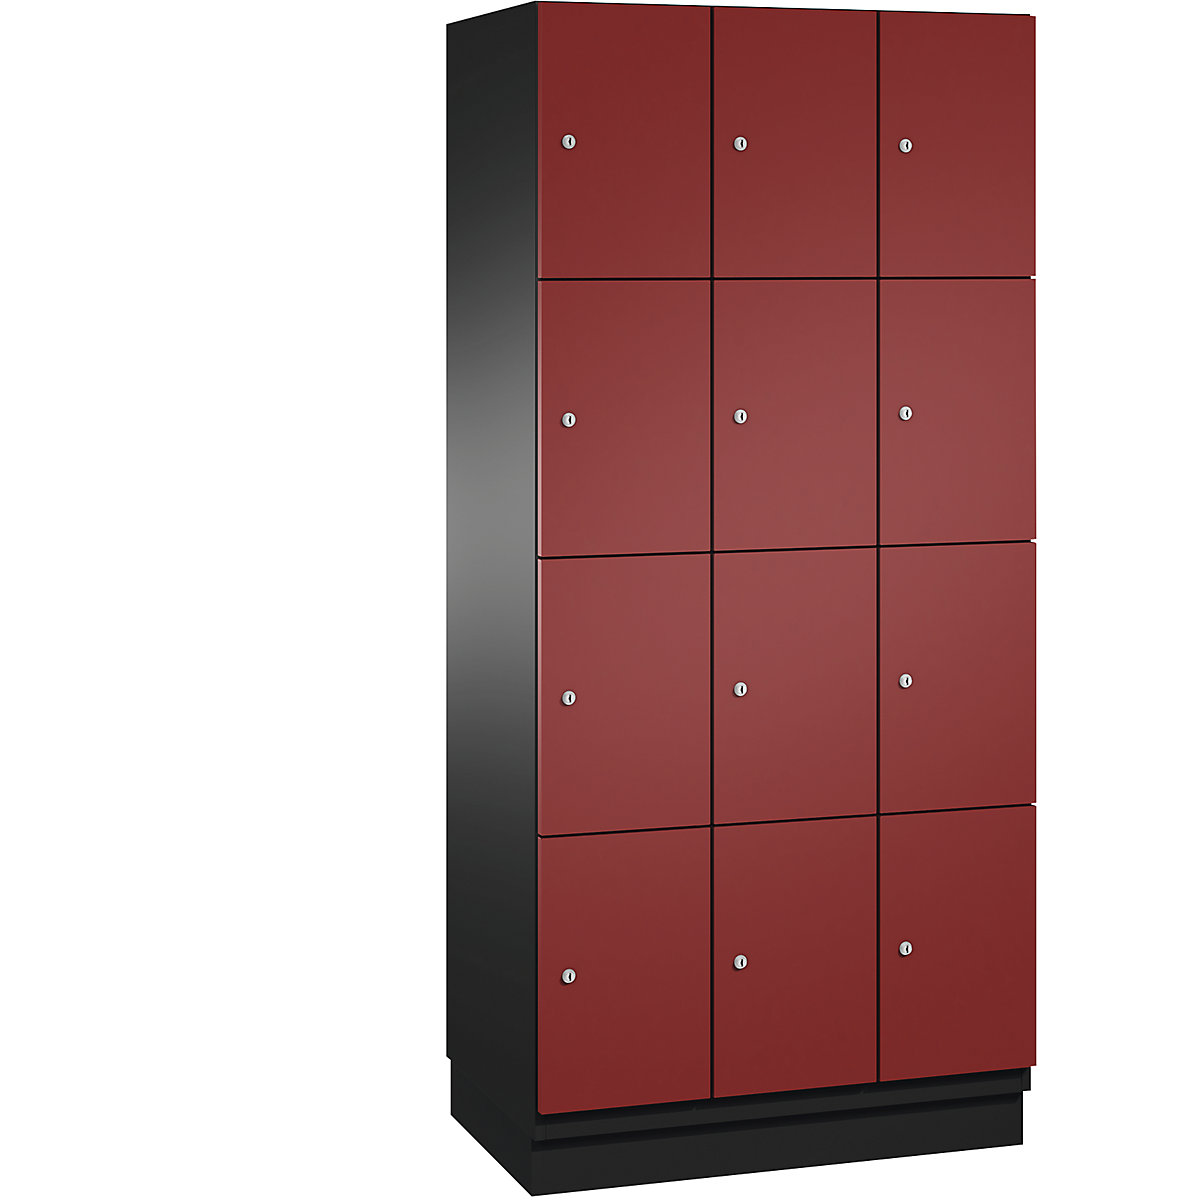 CAMBIO compartment locker with sheet steel doors – C+P, 12 compartments, width 900 mm, body black grey / door ruby red-2